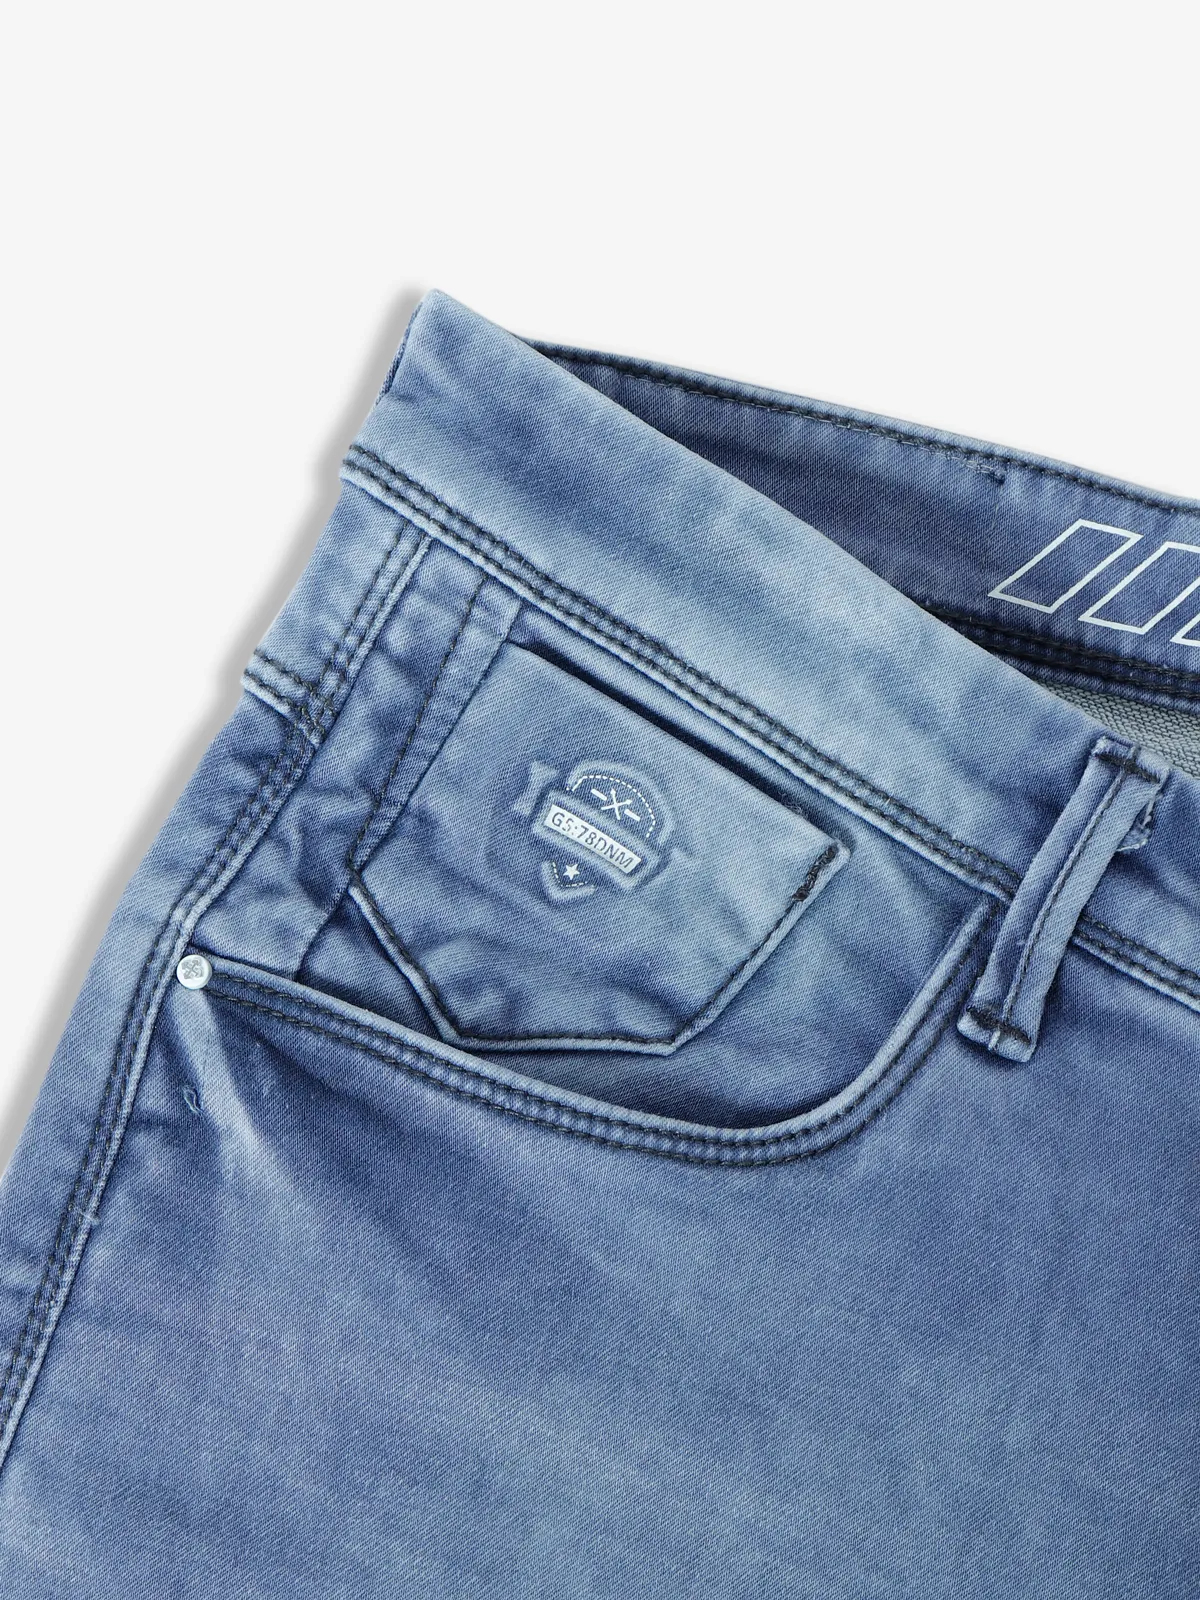 GS78 ice blue washed jeans